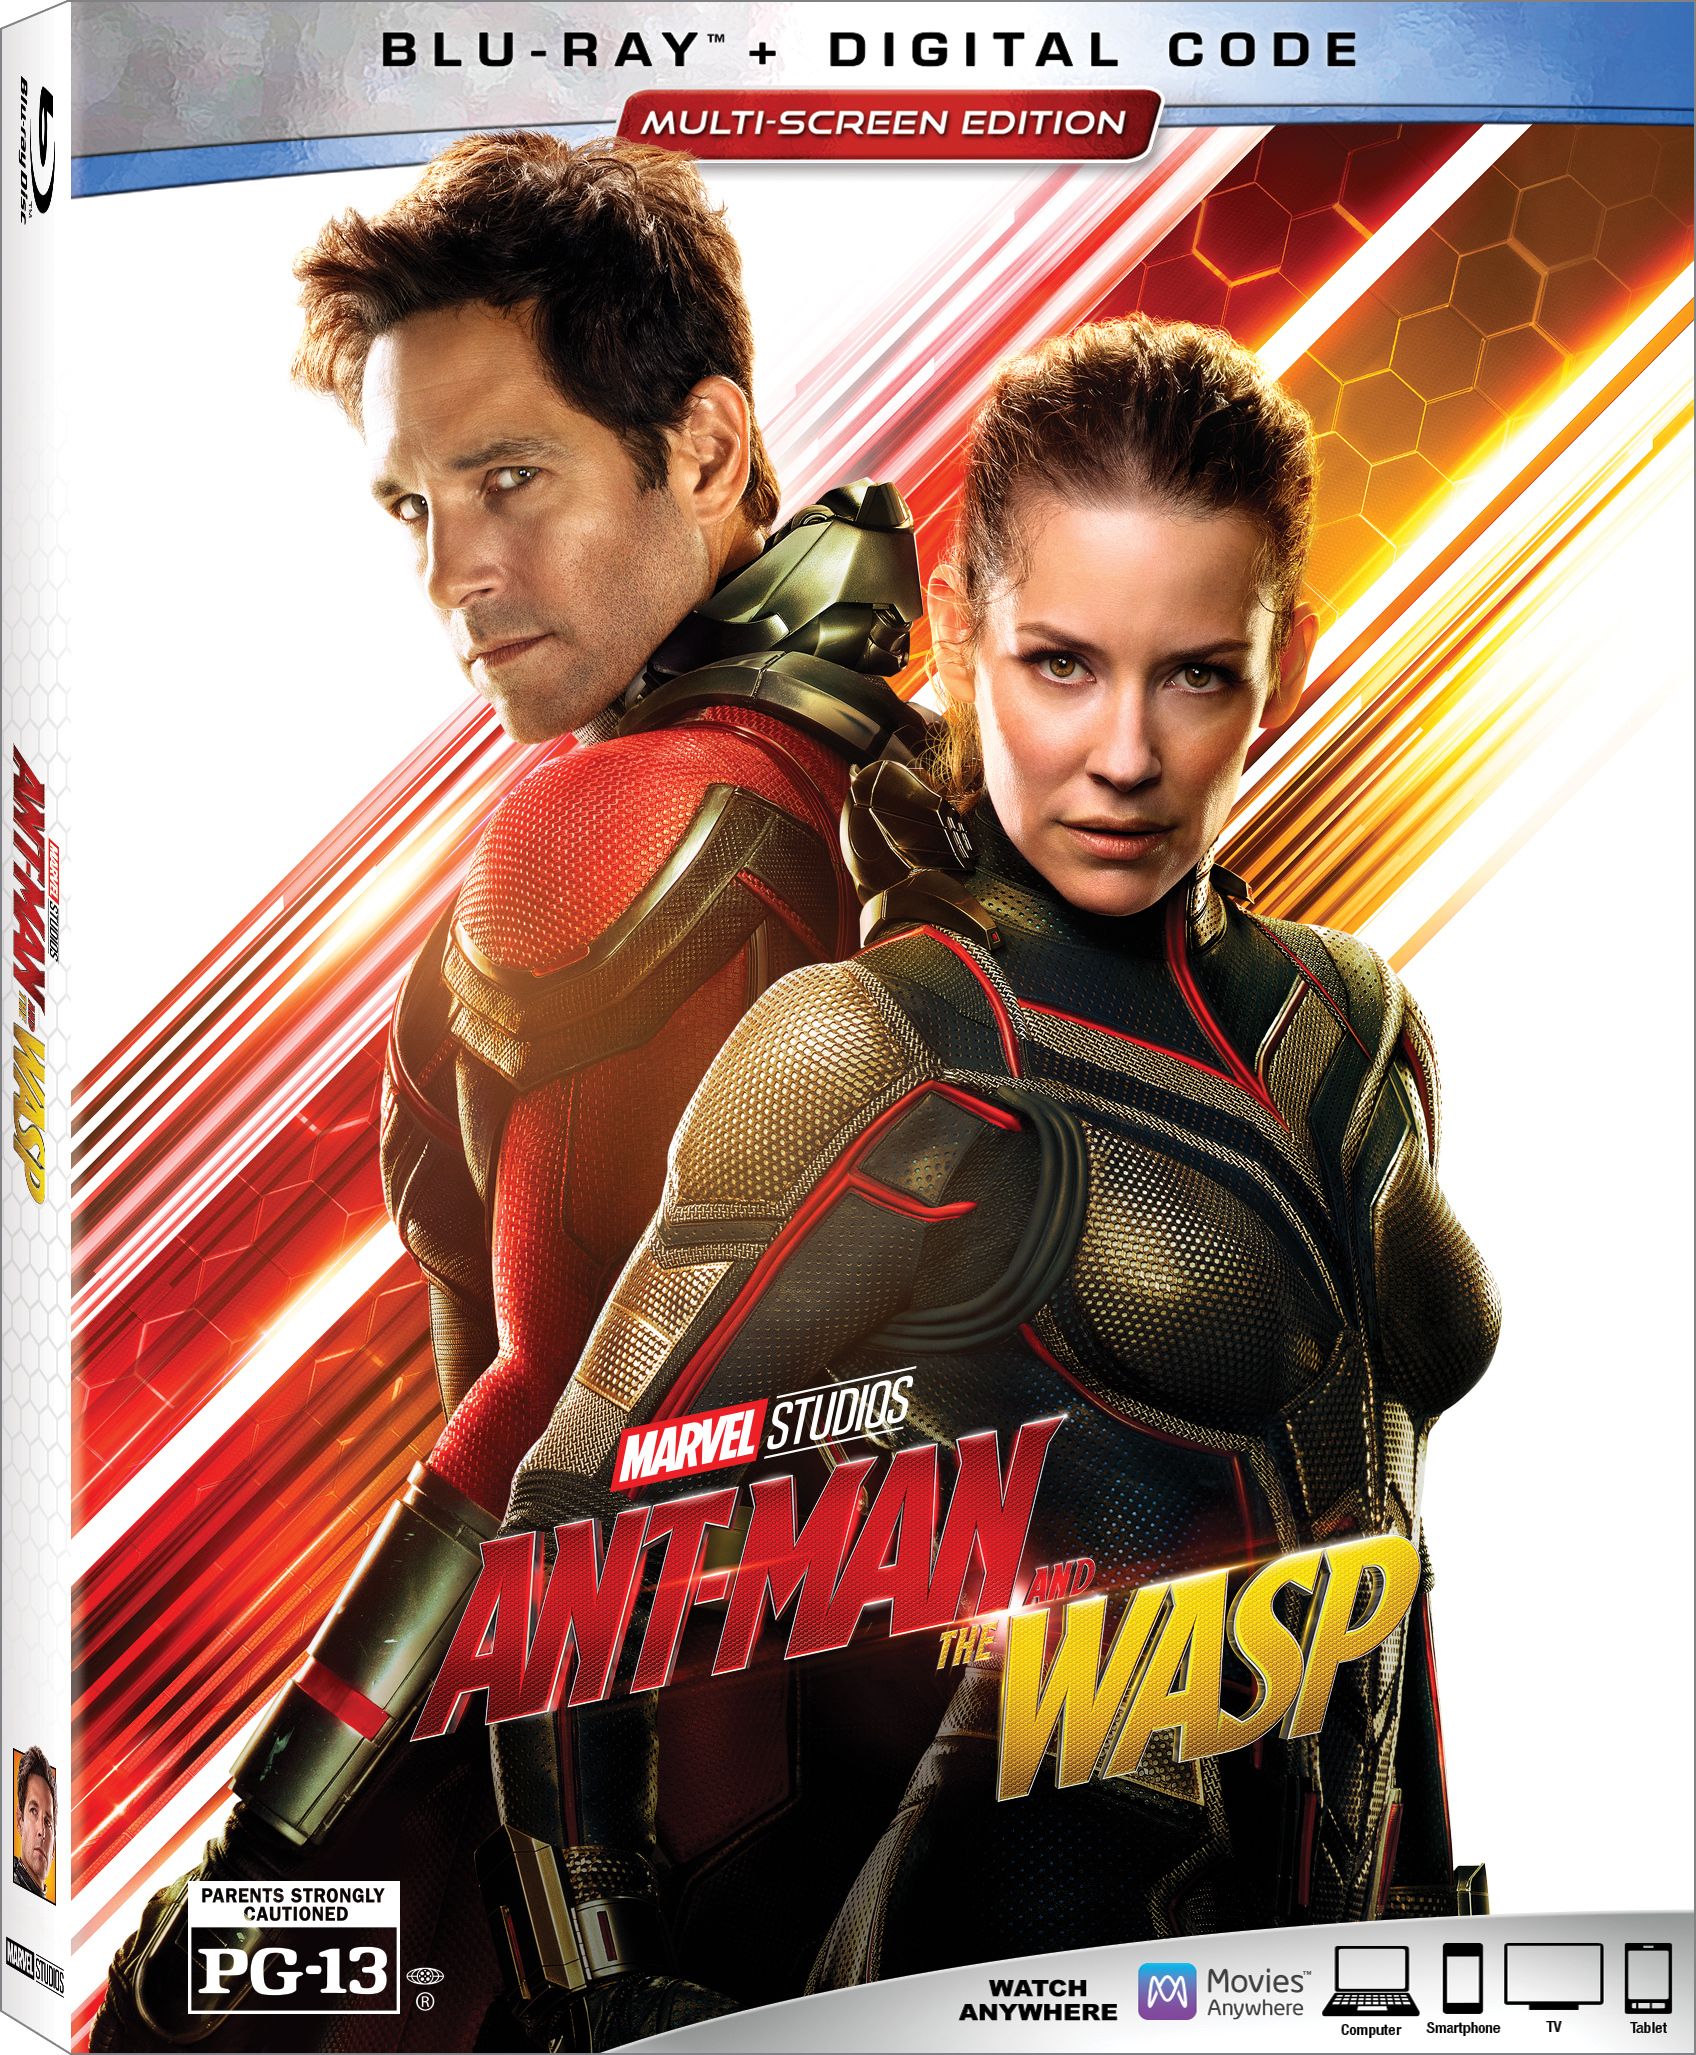 Ant-Man and the Wasp 4K Blu-ray art